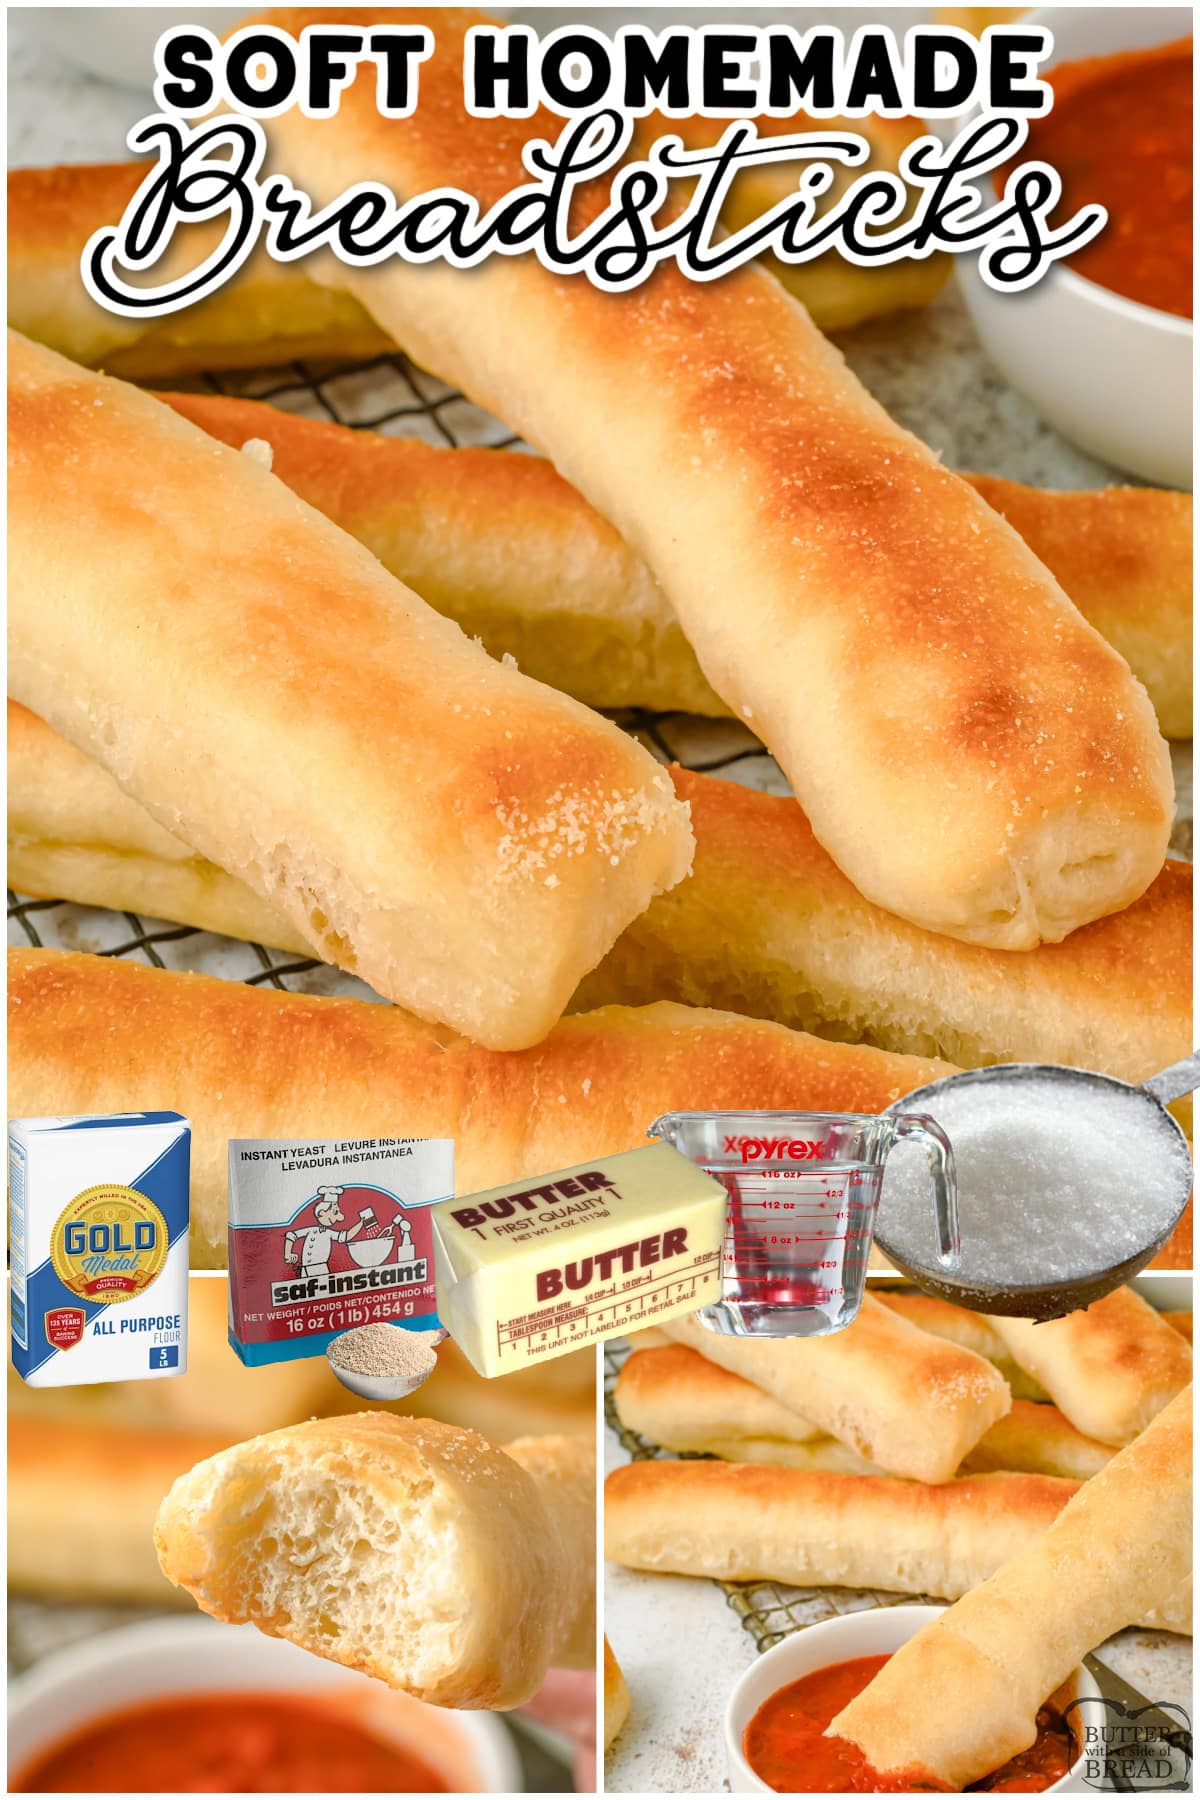 Soft Homemade Breadsticks are made from scratch with yeast, flour, & oil, then topped with savory garlic butter for a classic Italian taste! Amazing buttery breadsticks everyone loves!